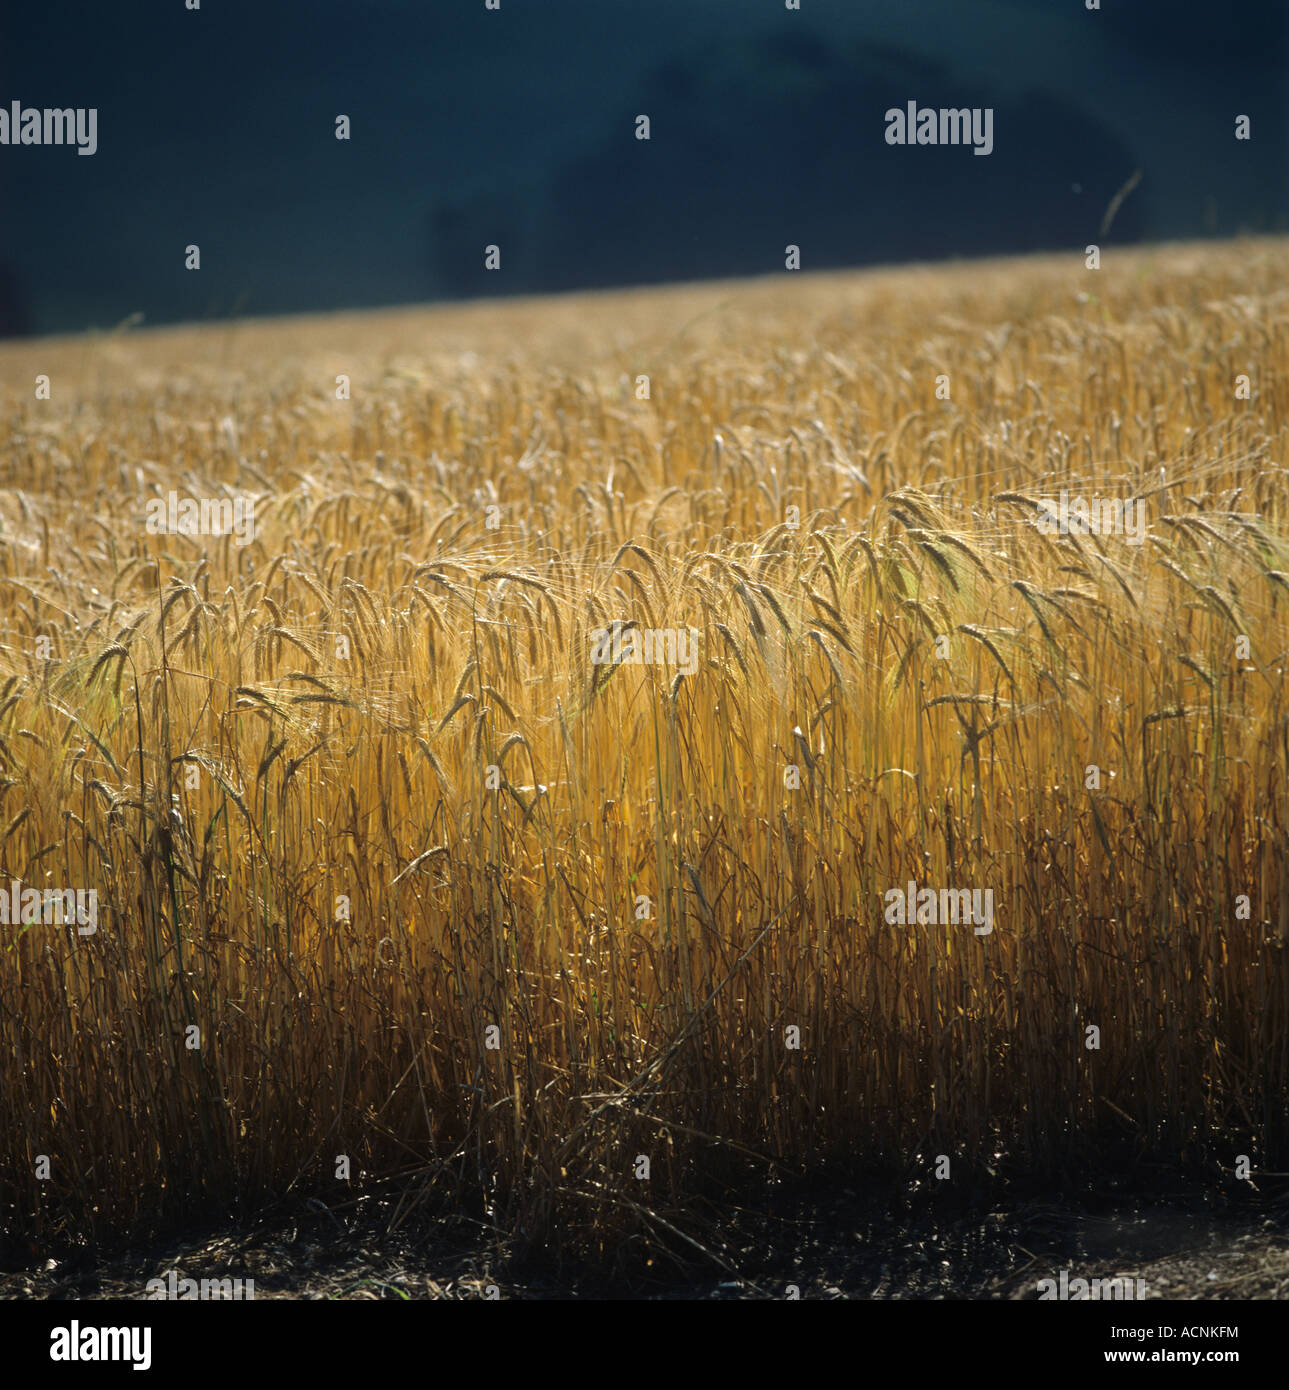 contre jour of ripe barley ears against a dark background Stock Photo